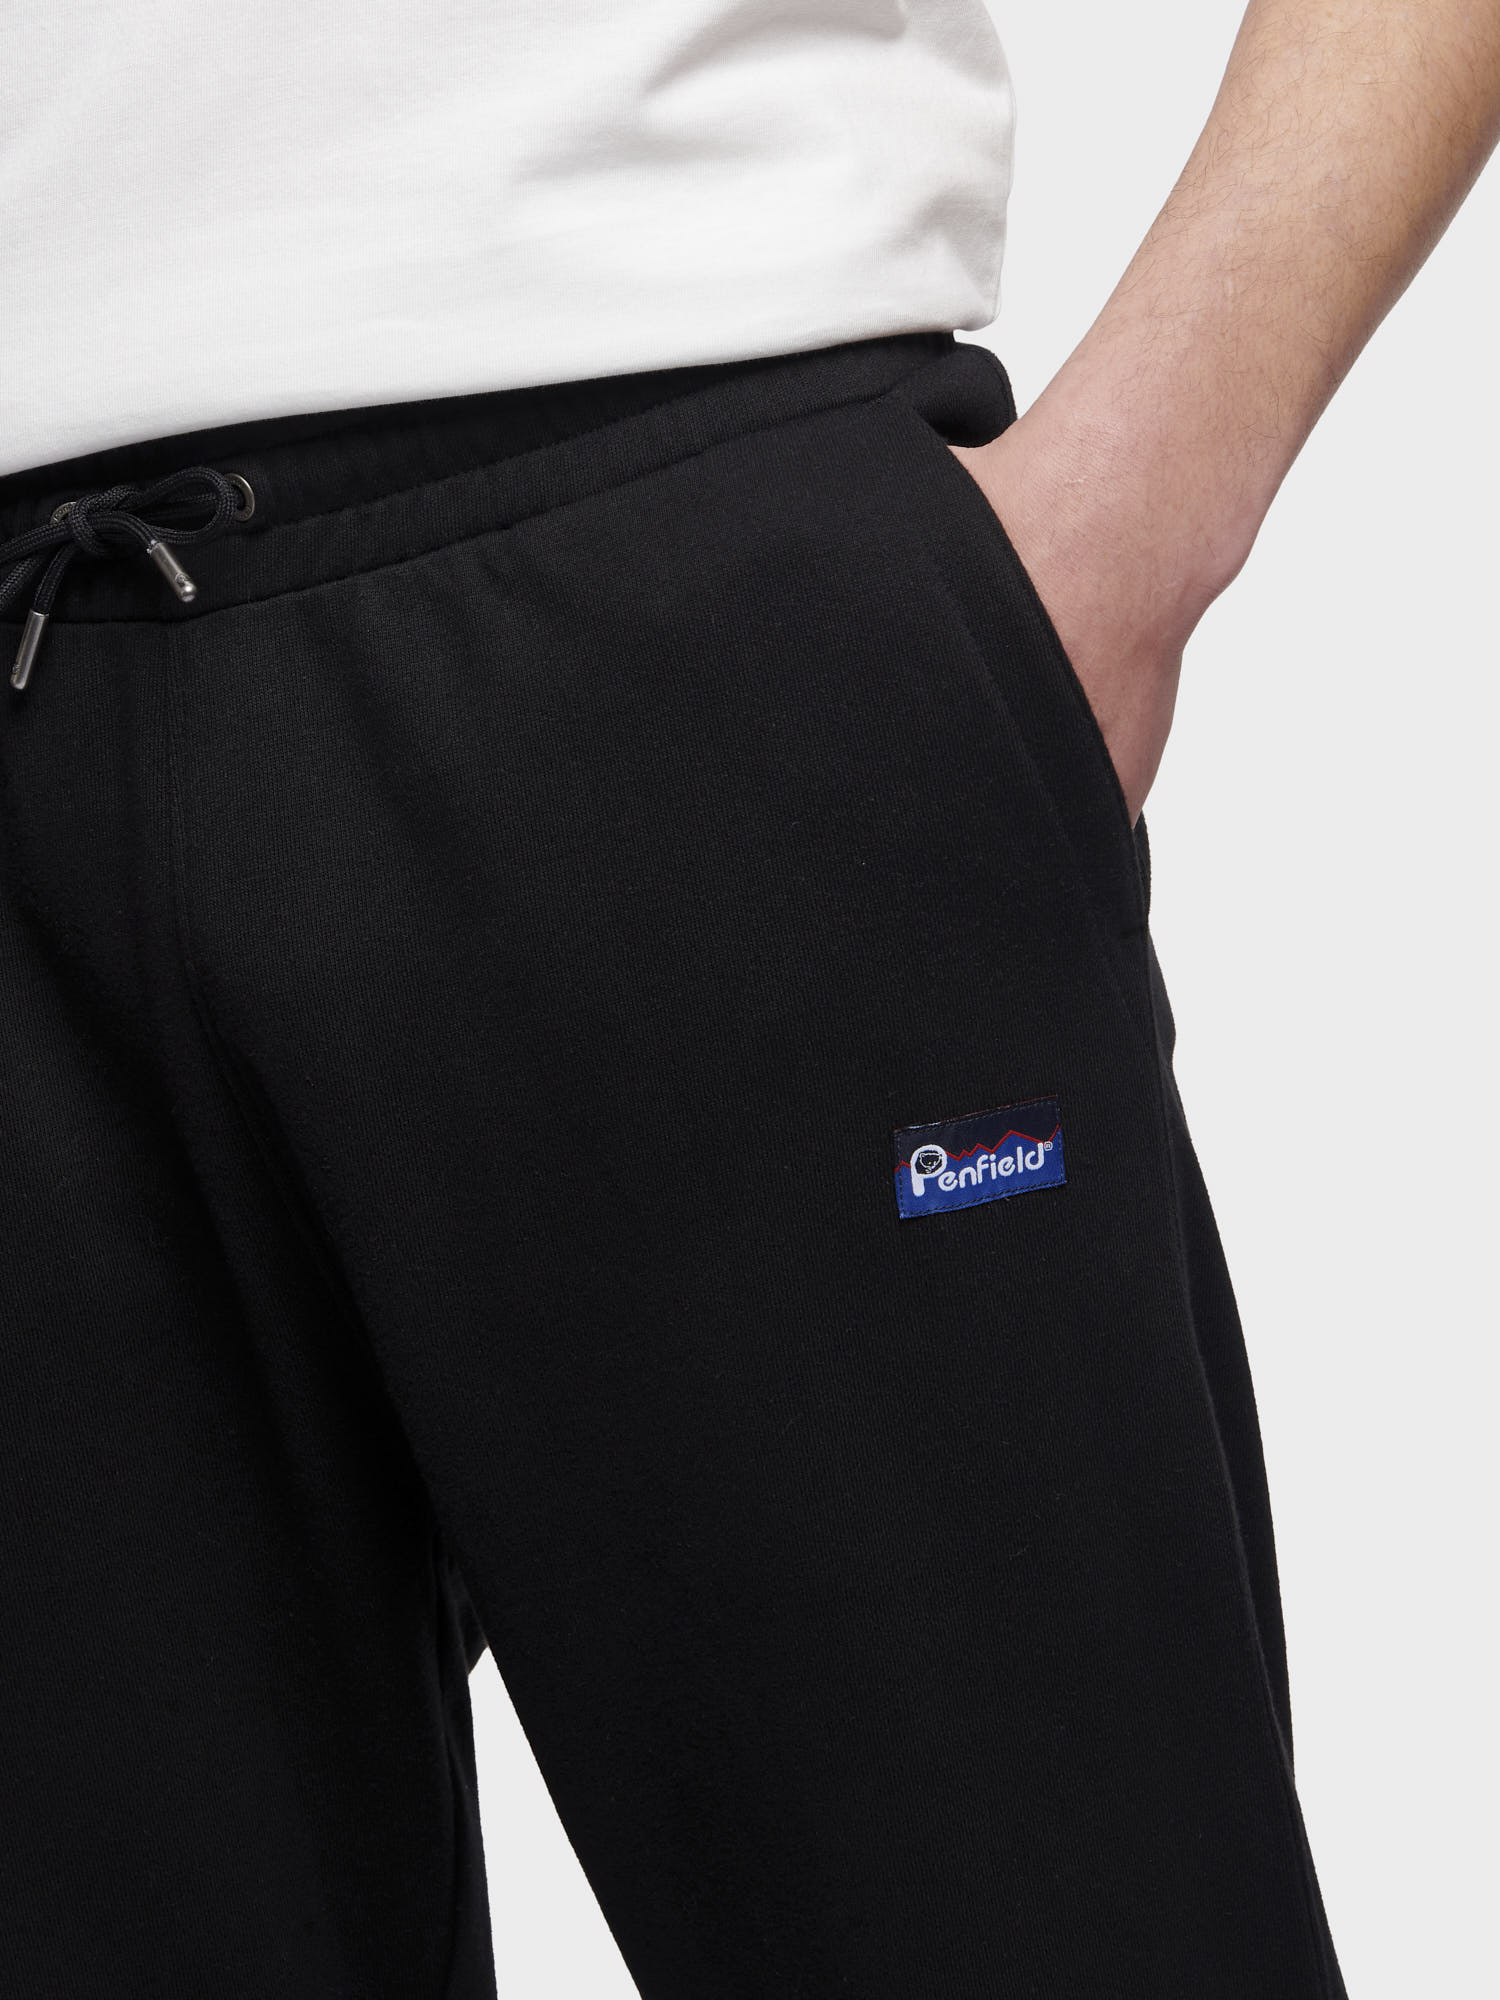 Relaxed Fit Original Logo Joggers in Black